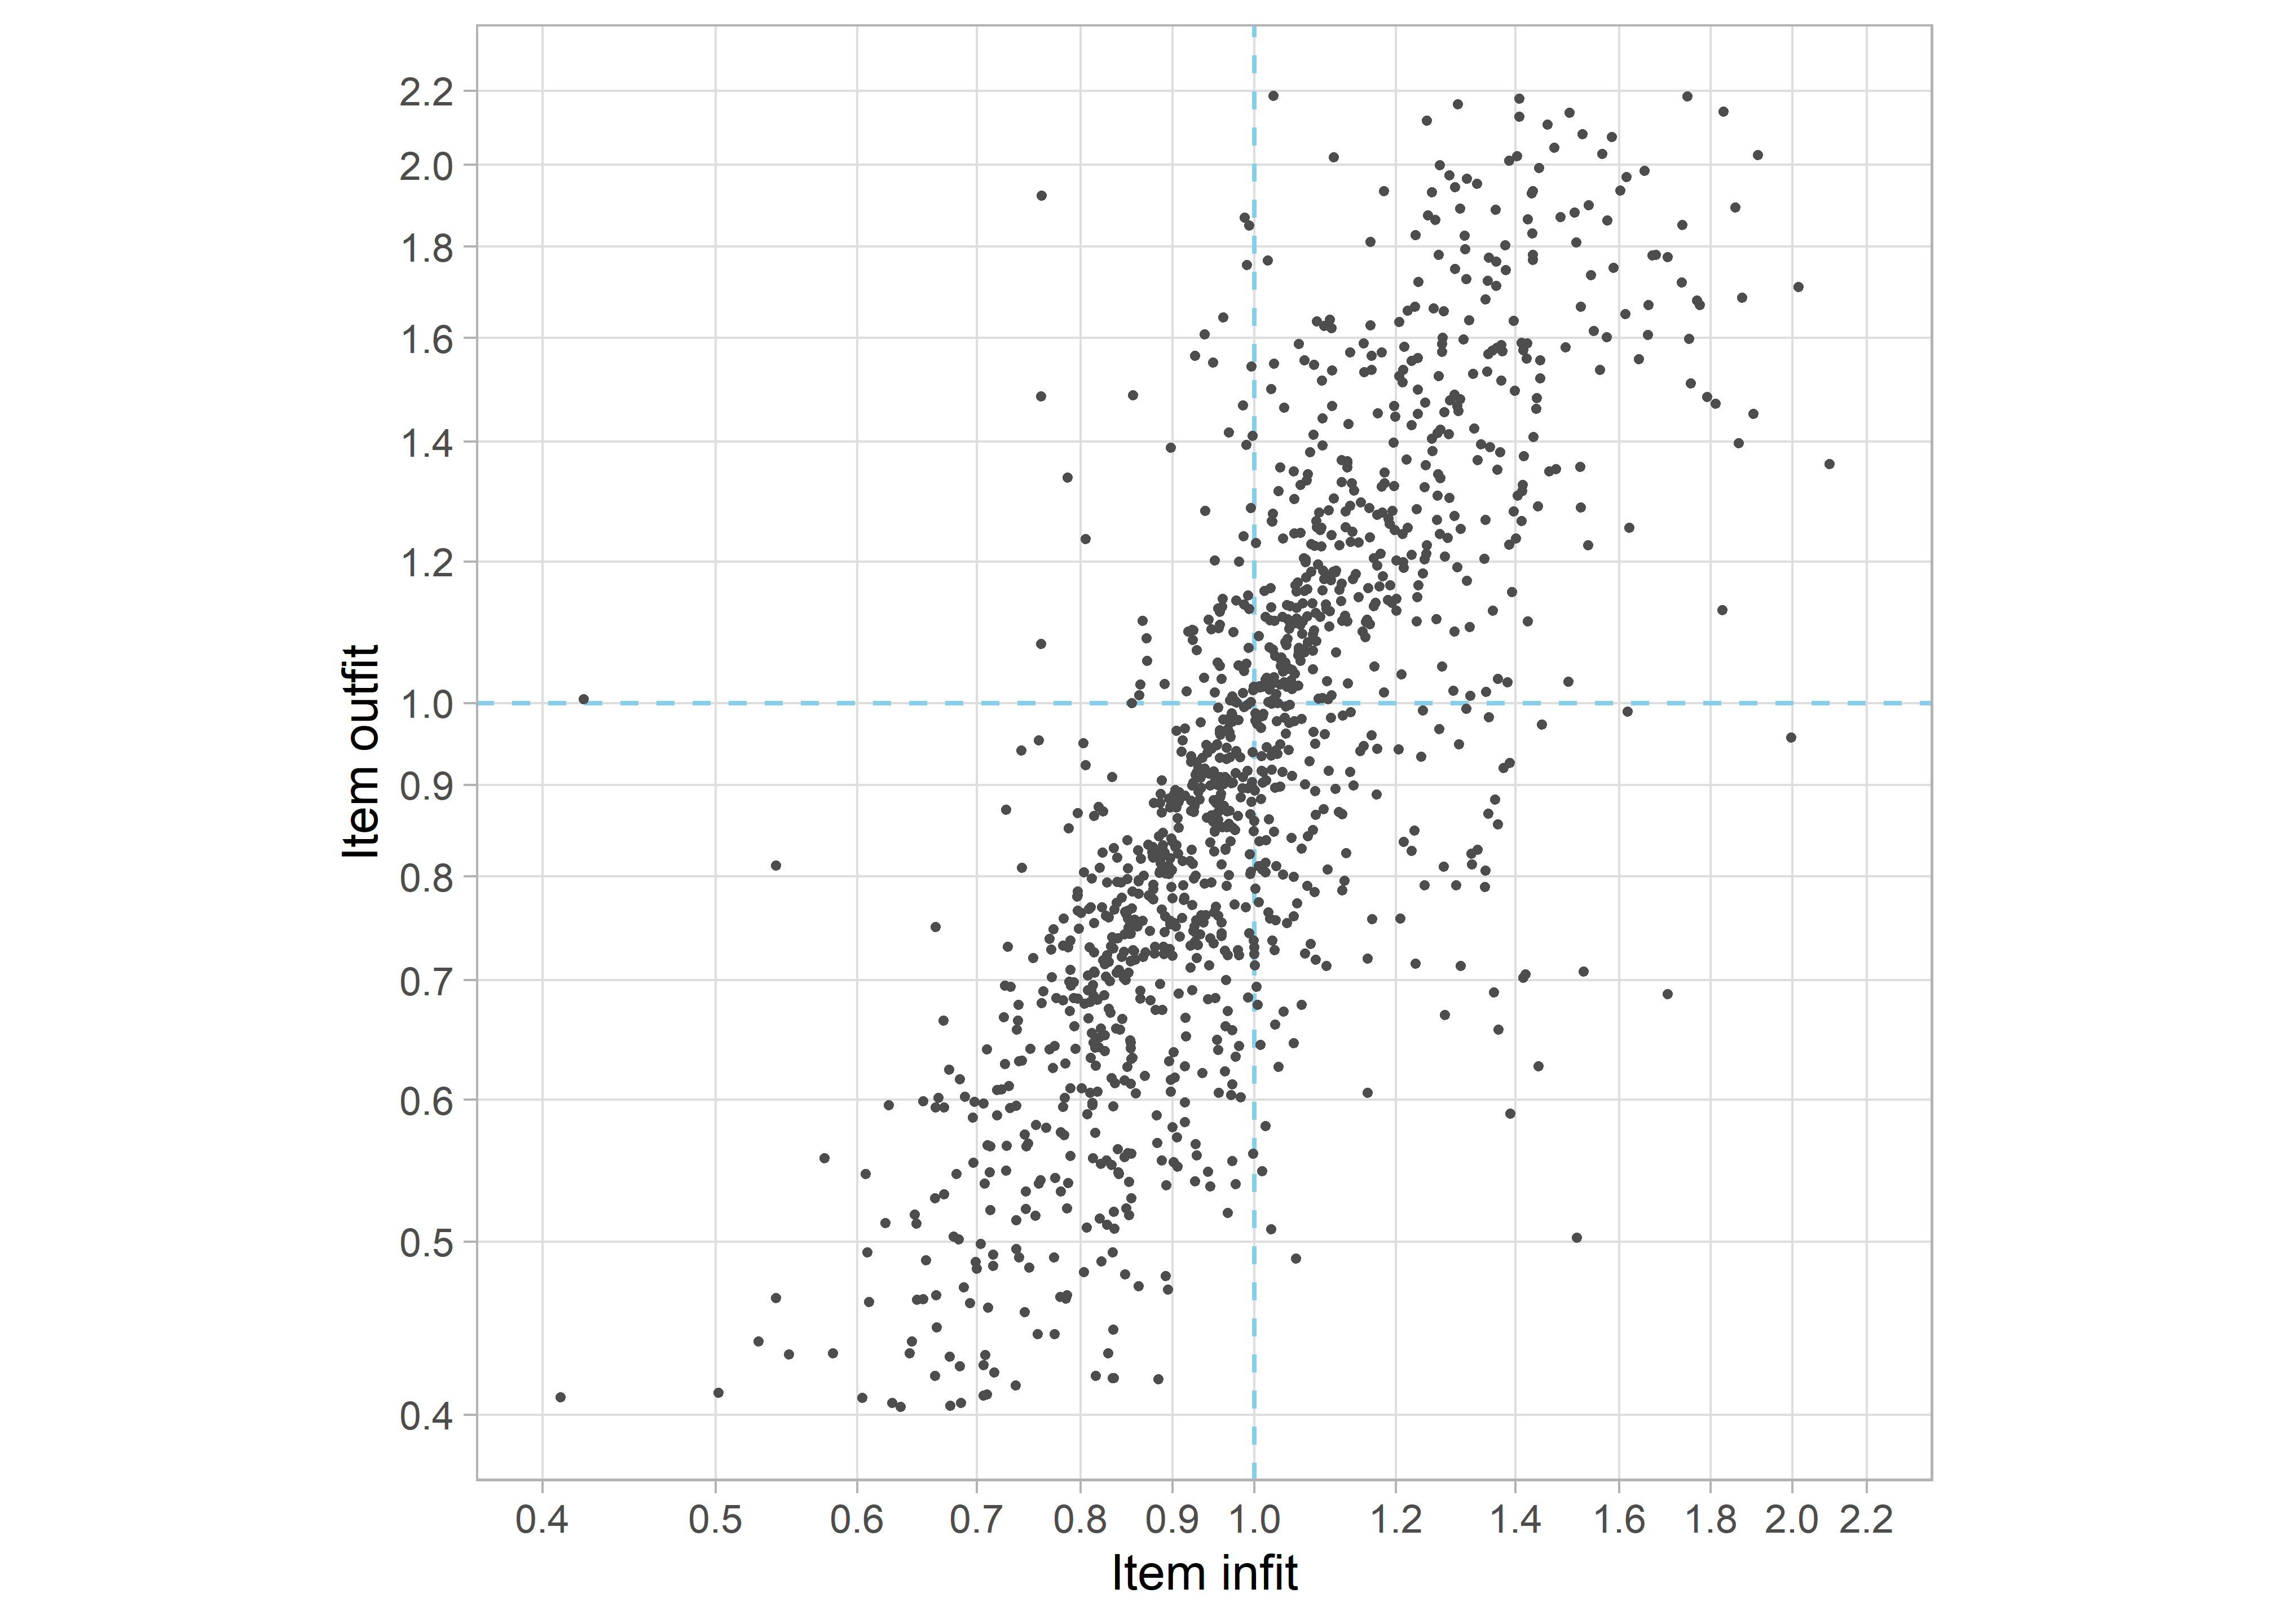 Infit and outfit of 1339 items in model 1339_11. About 8 percent of the points falls outside the plot.